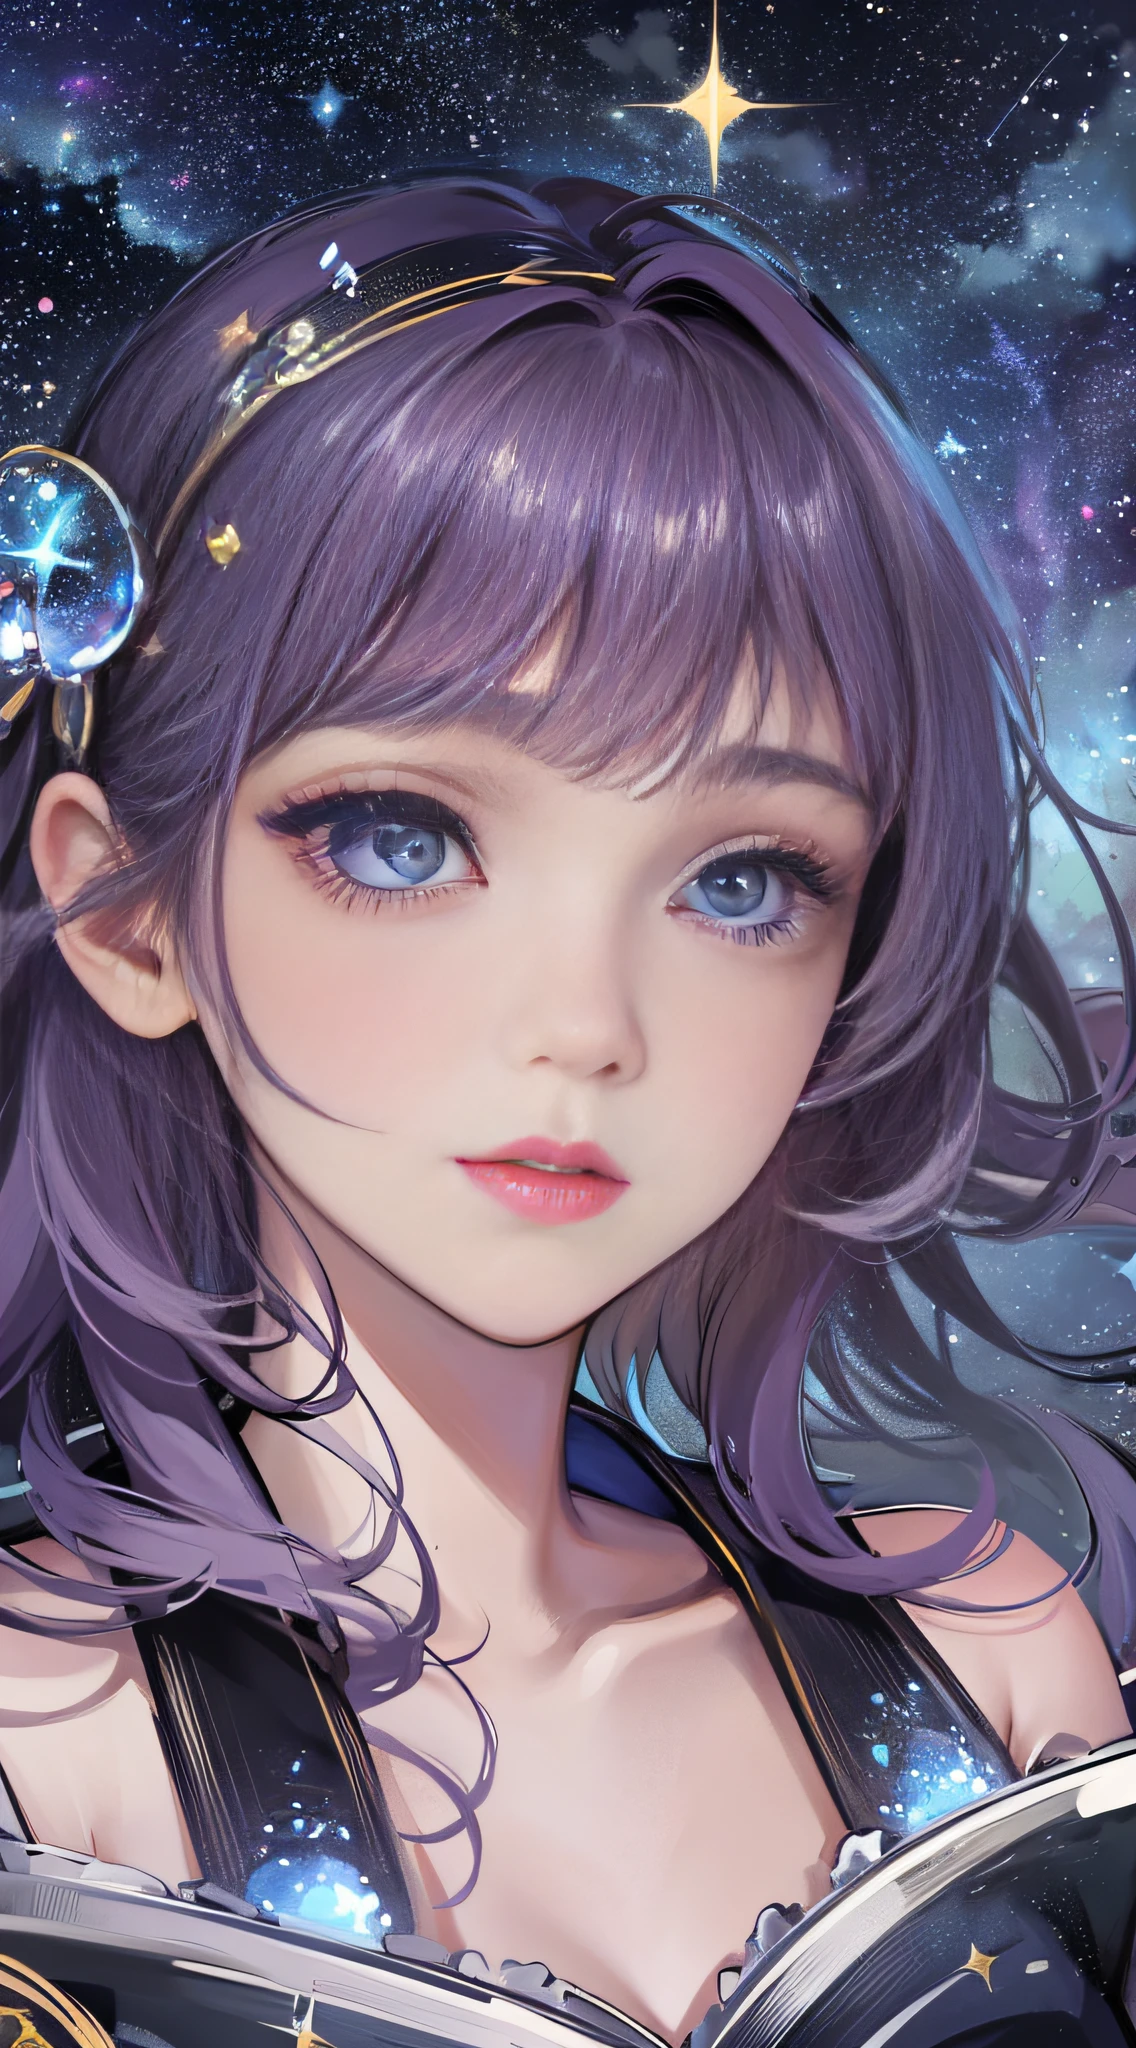 High detail, super detail, super high resolution, girl enjoying her time in the dream galaxy, surrounded by stars, warm light sprinkled on her, background is starry sky with colorful galaxies and galaxy clouds, stars flying around her, delicate face, adding playful atmosphere , --v6